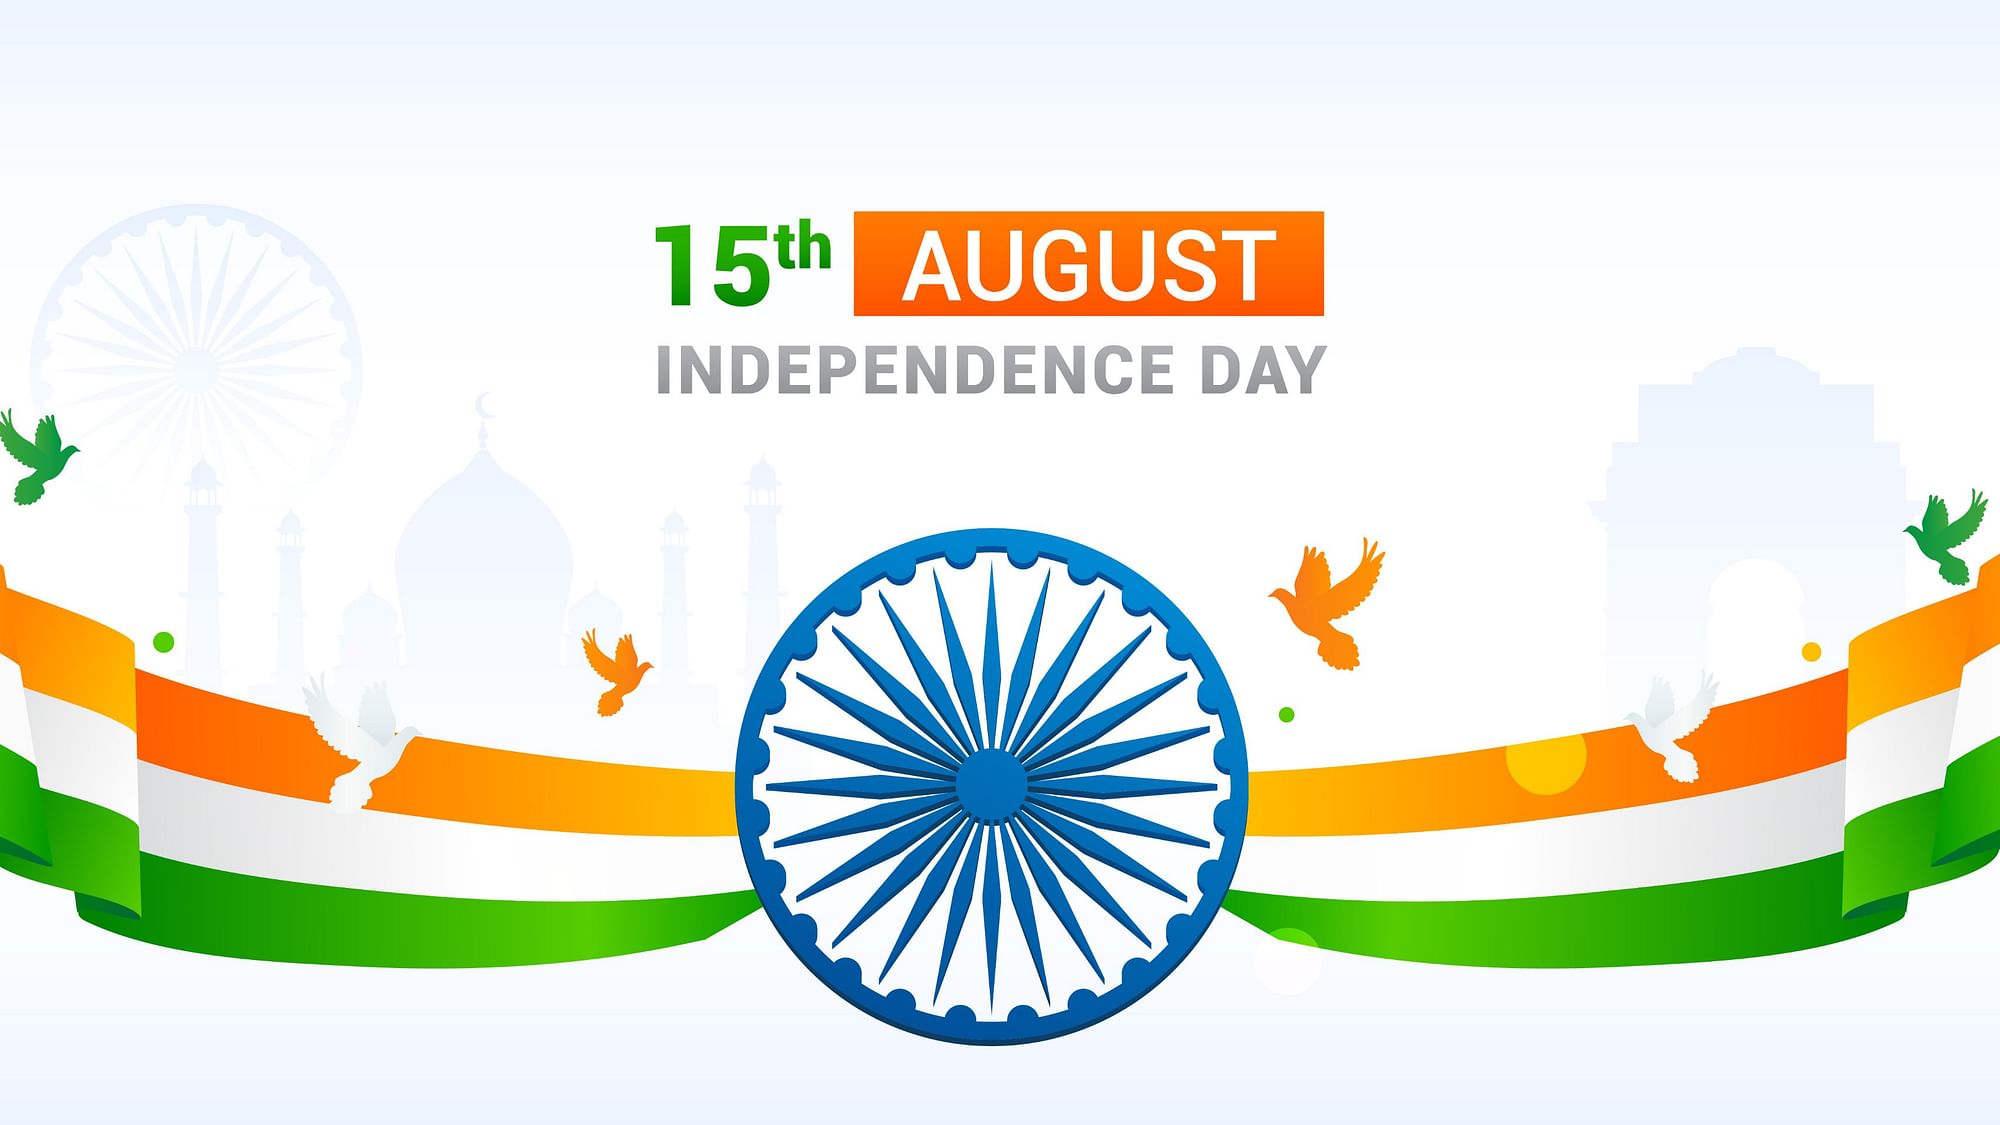 74th Independence Day Wishes in Hindi and English